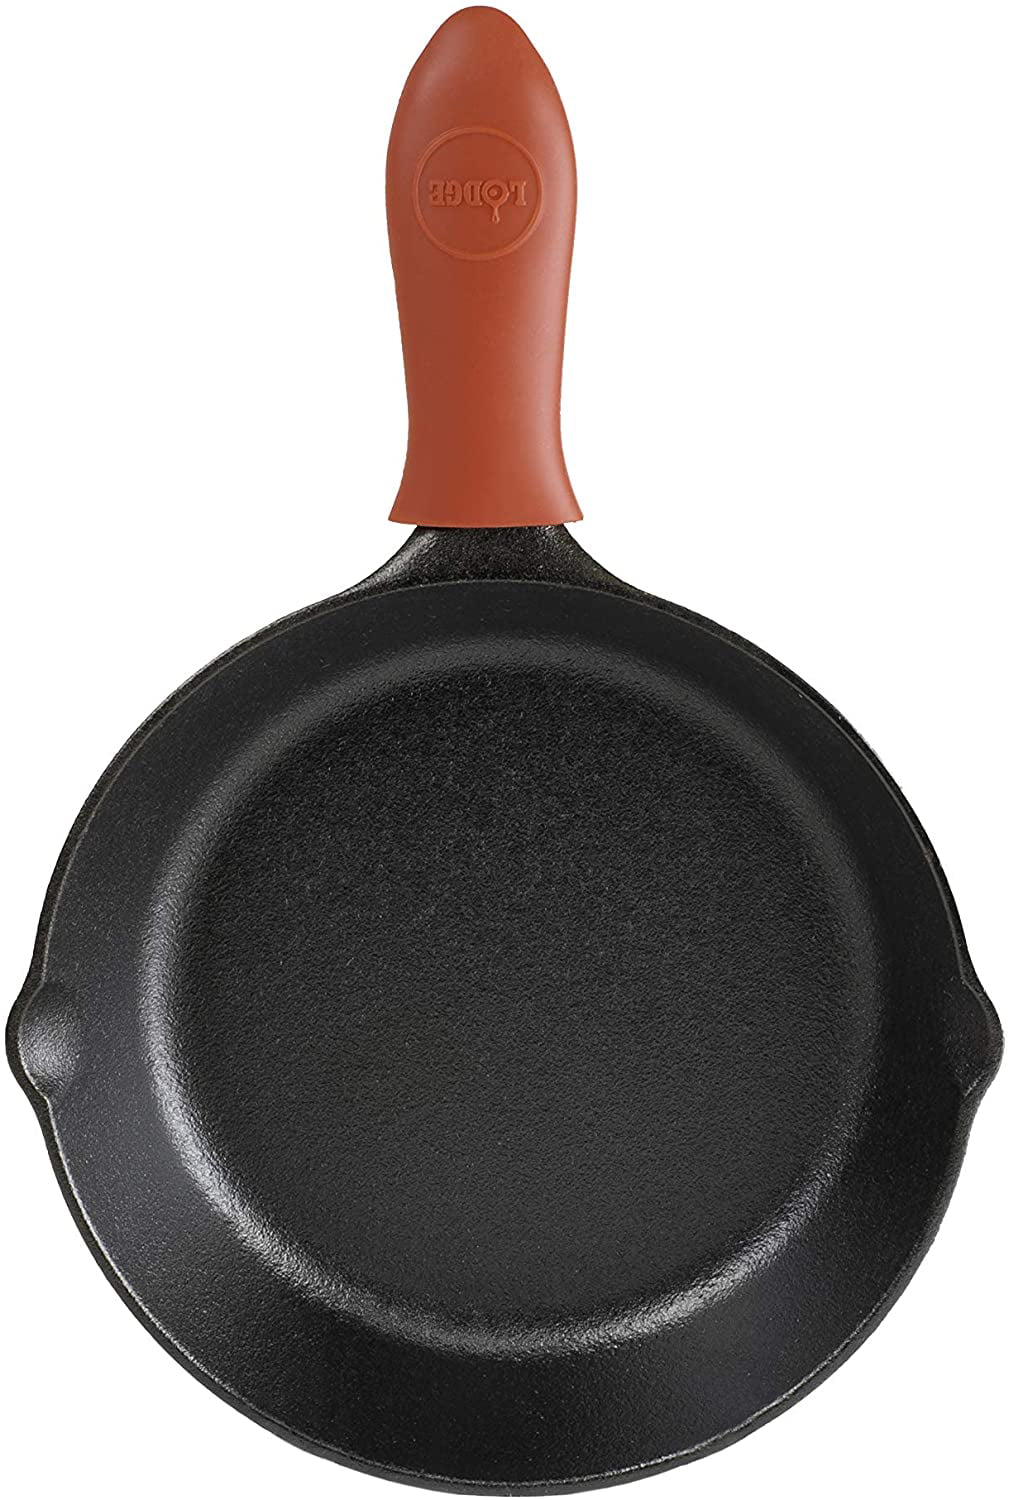 Lodge Cast Iron Skillet with Red Silicone Hot Handle Holder 12”